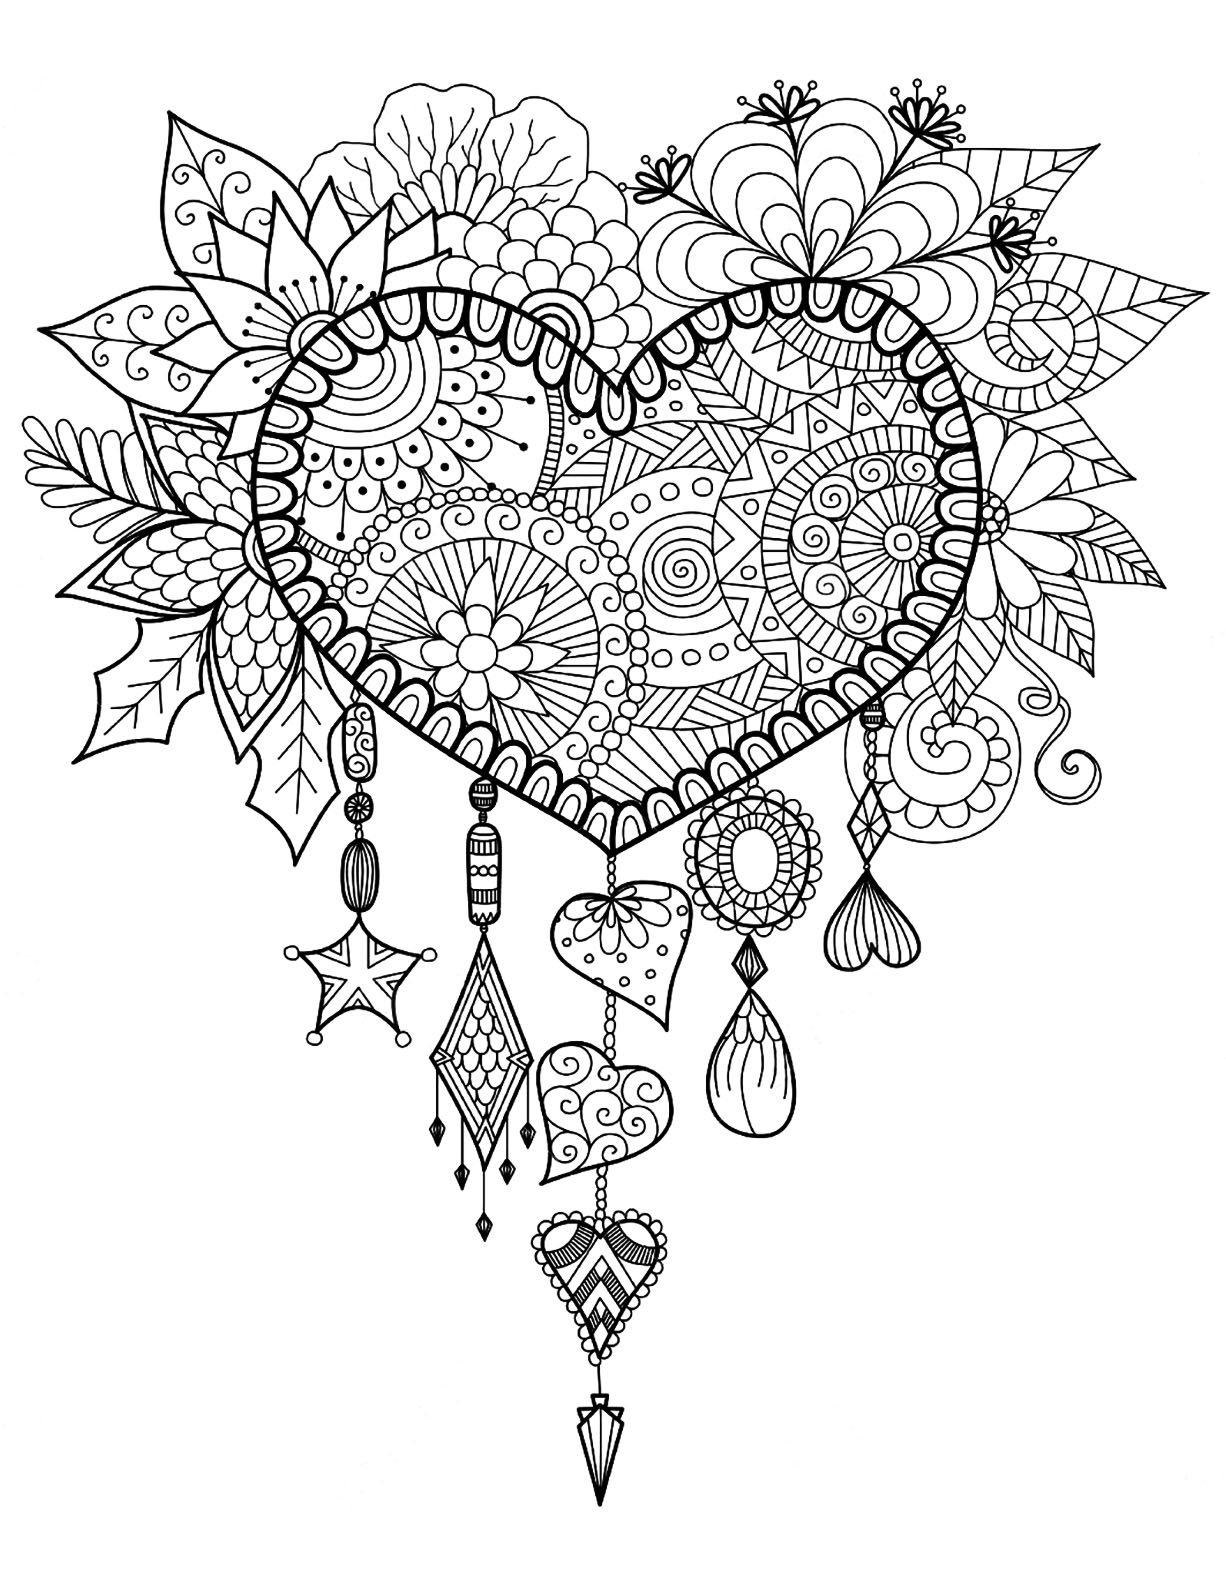 Heart dreamcatcher | Zen and Anti stress - Coloring pages ...